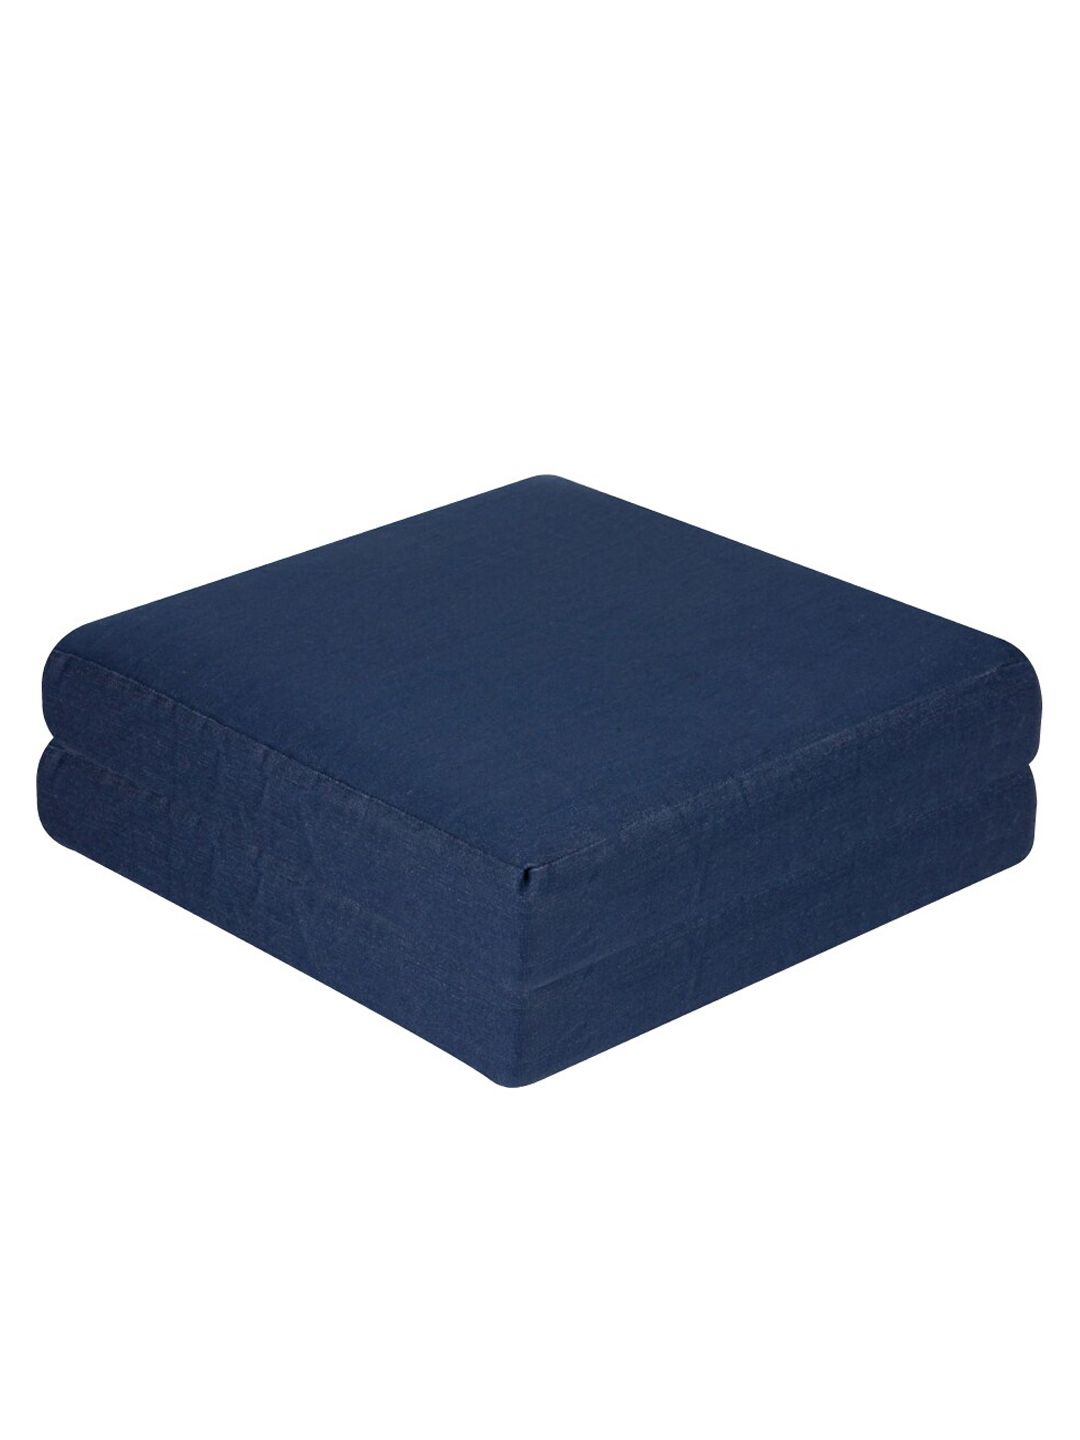 The White Willow Set of 2 Navy Blue Square Cushion Seat Pads Price in India